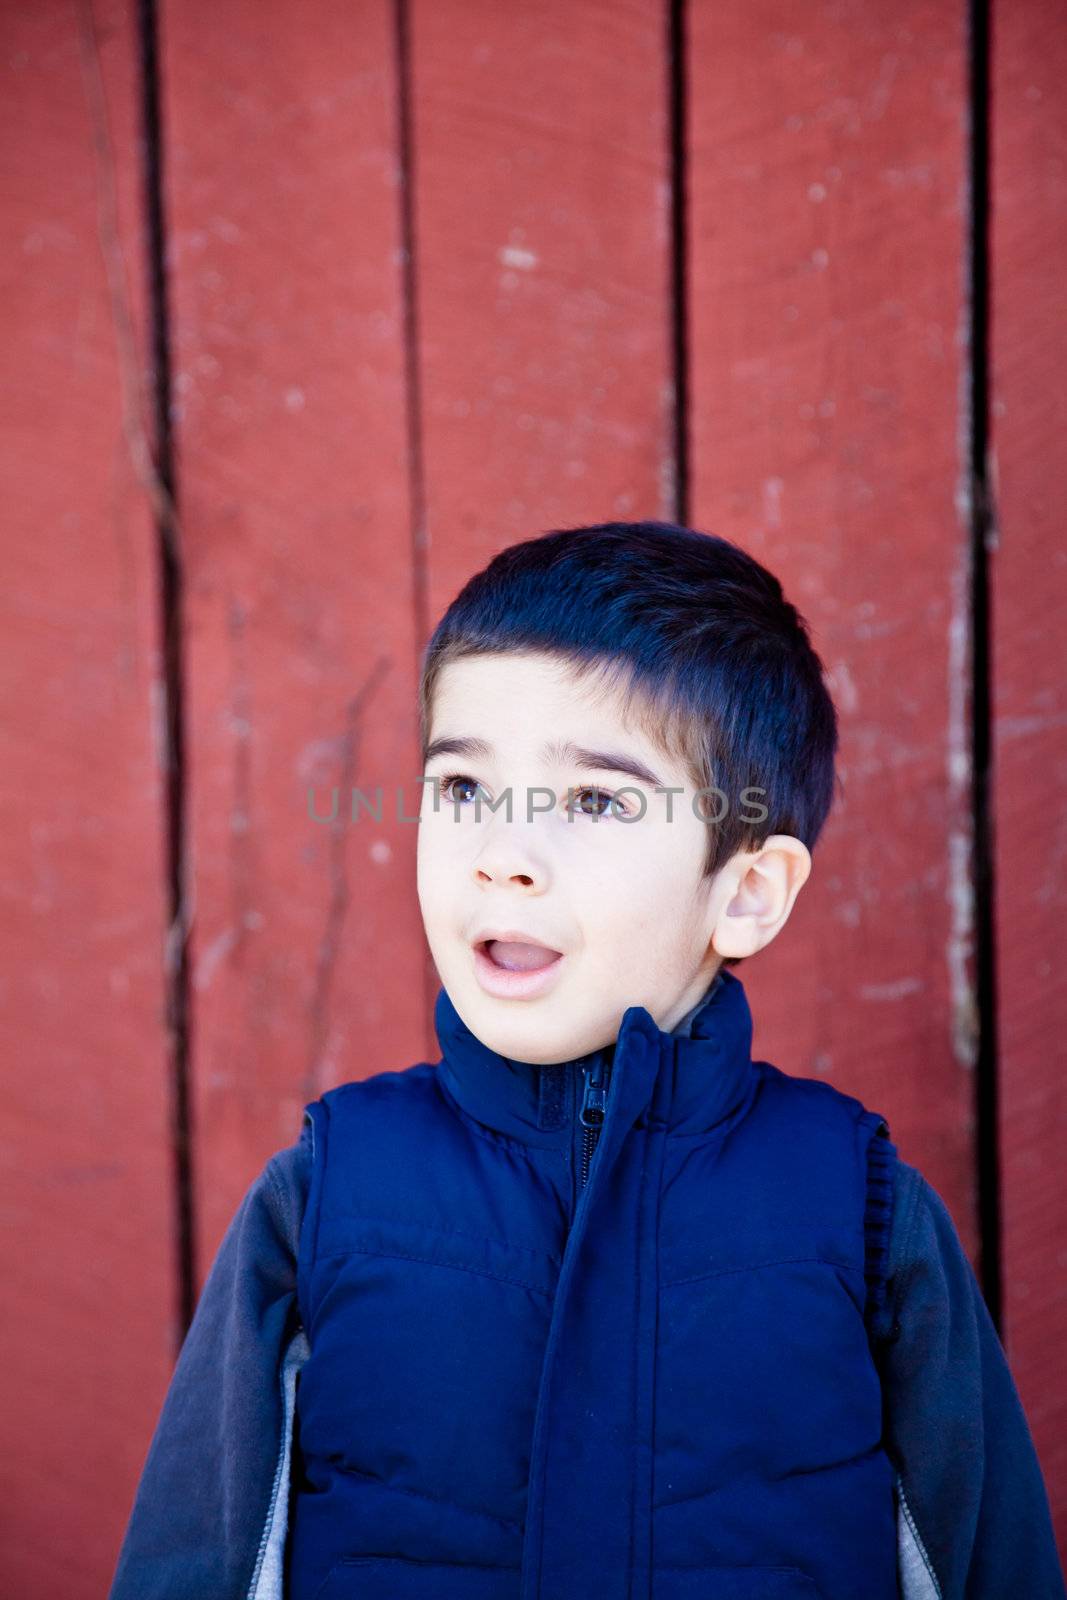 Little boy looking up and to the left in front of red textured background with a surprised and amazed expression.